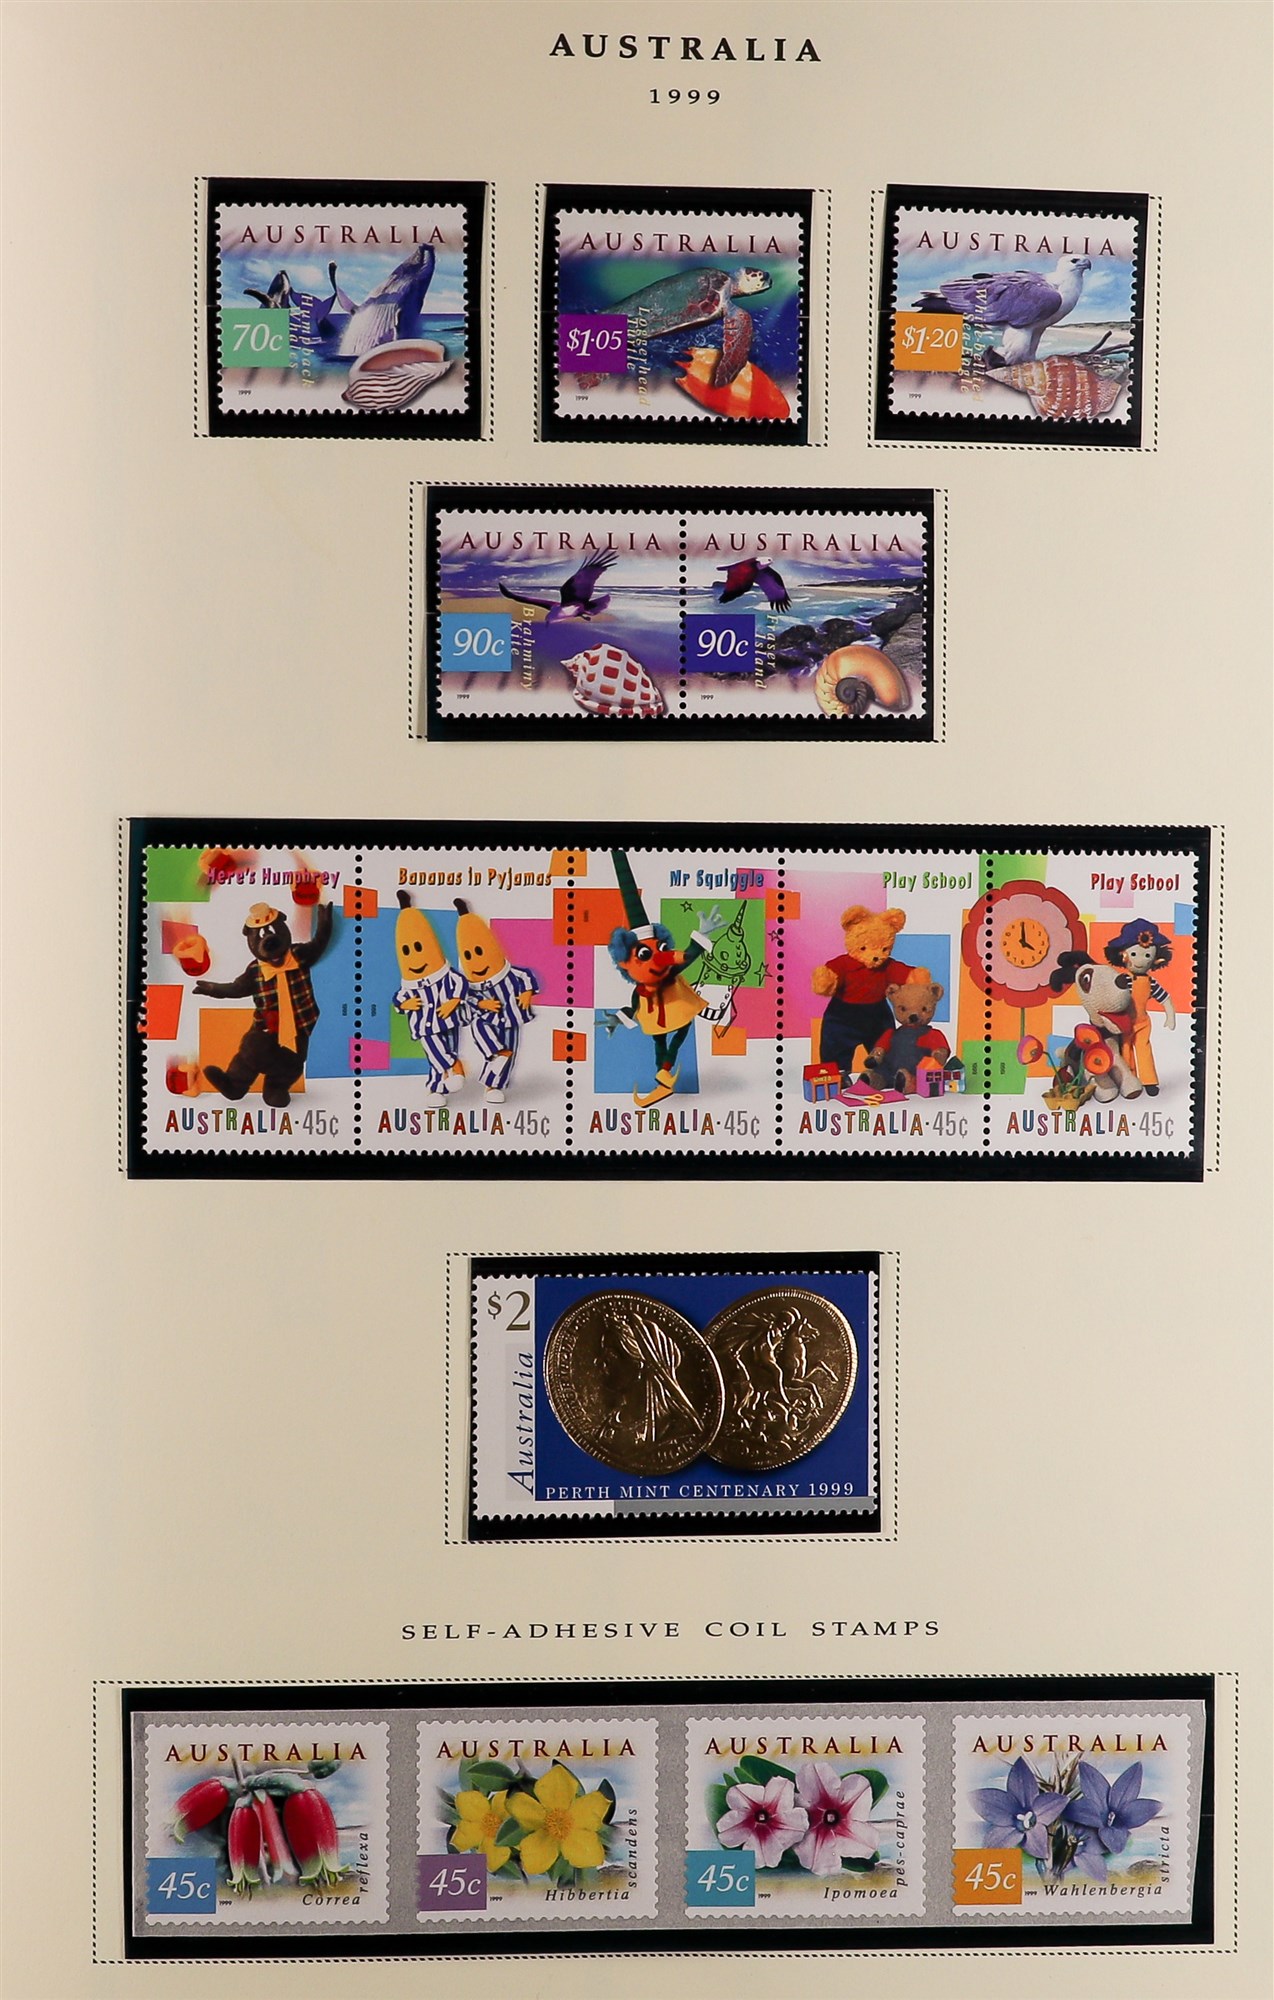 AUSTRALIA 1966 - 2002 NEVER HINGED MINT COLLECTION in a large album, near- complete for the period - Image 21 of 26